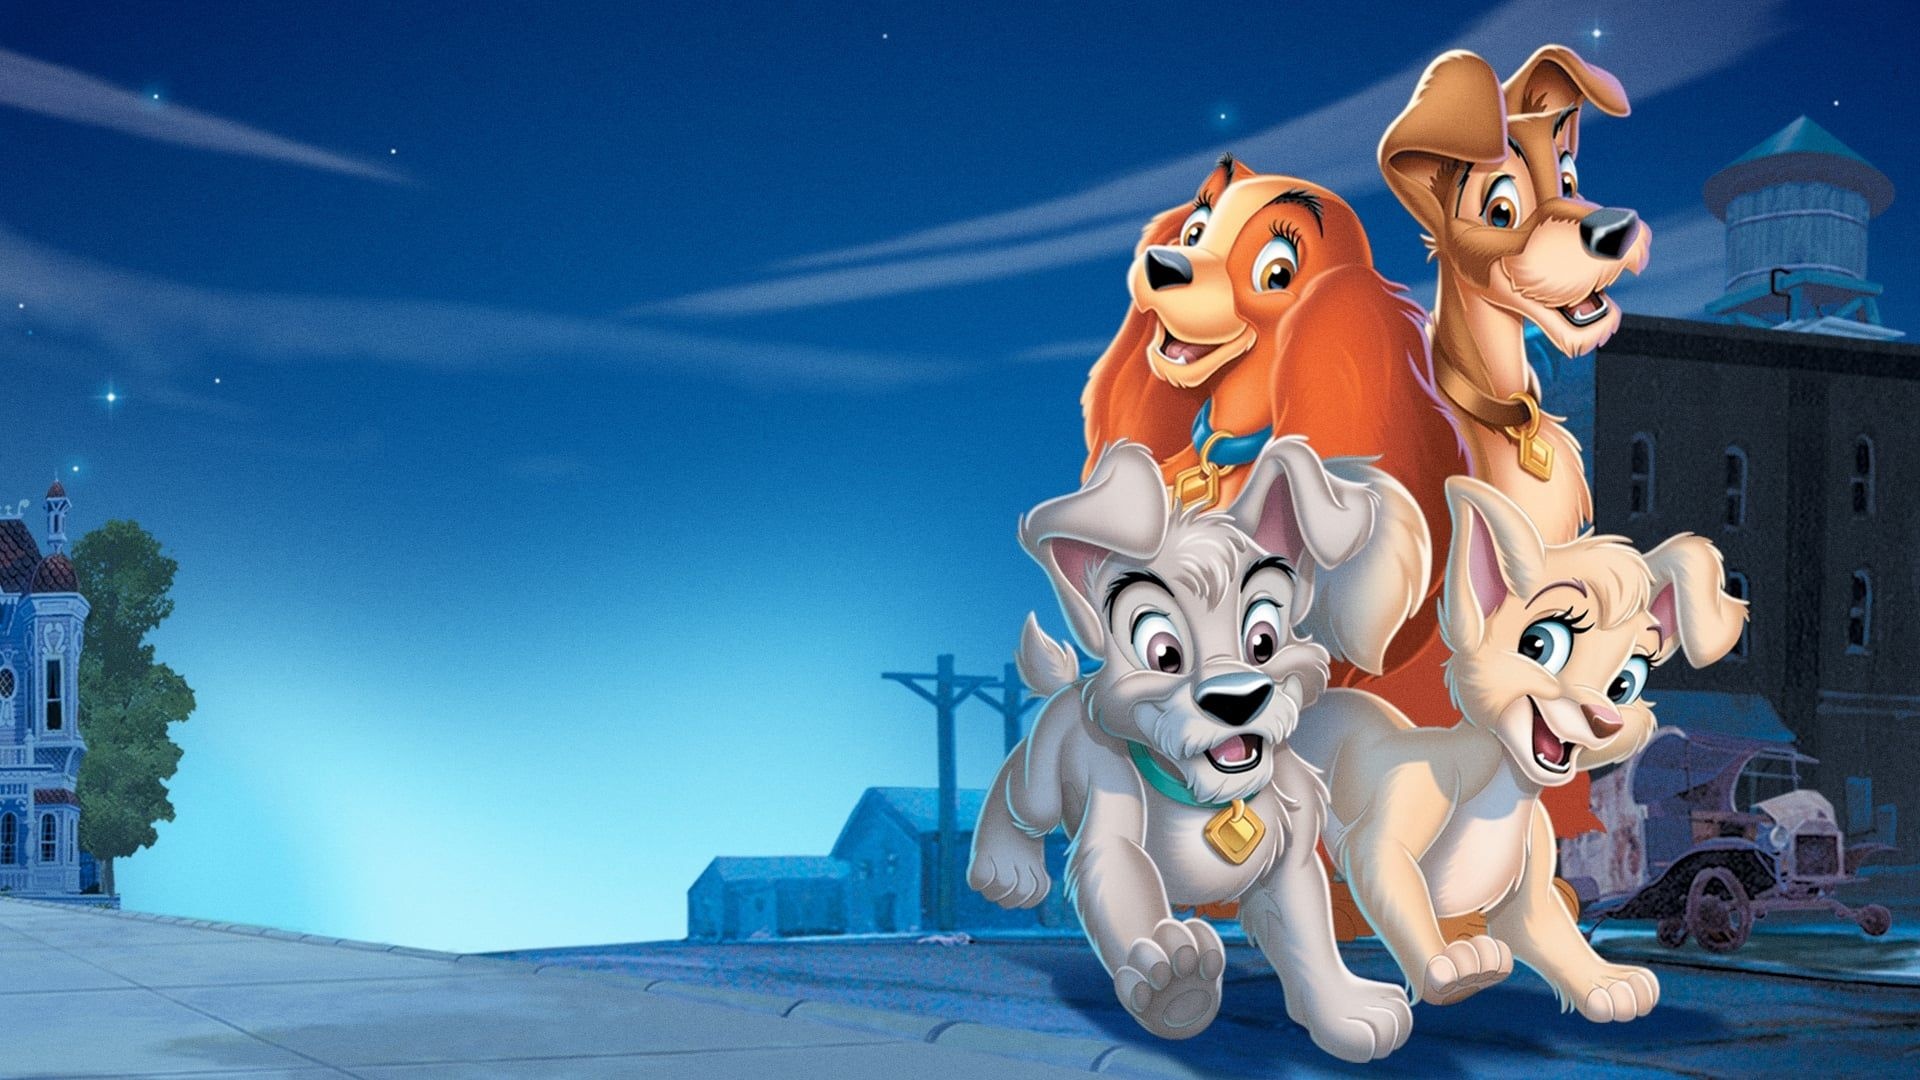 Lady and the Tramp, Scamp's adventure, Disney movie streaming, Online watch, 1920x1080 Full HD Desktop